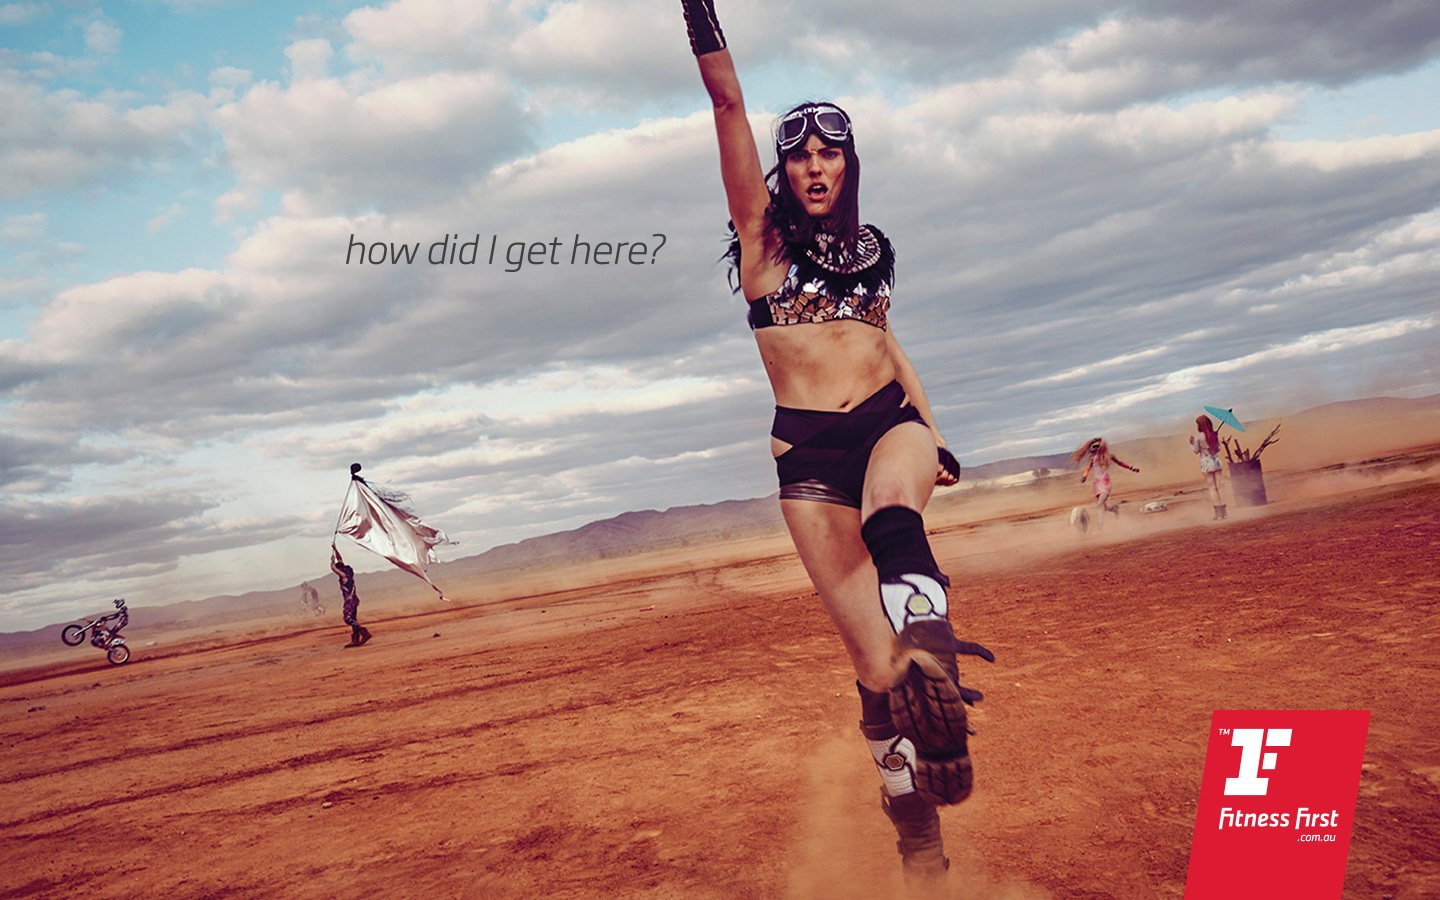 gym billboard photo of girl at burning man with tagline “how did I get here?”